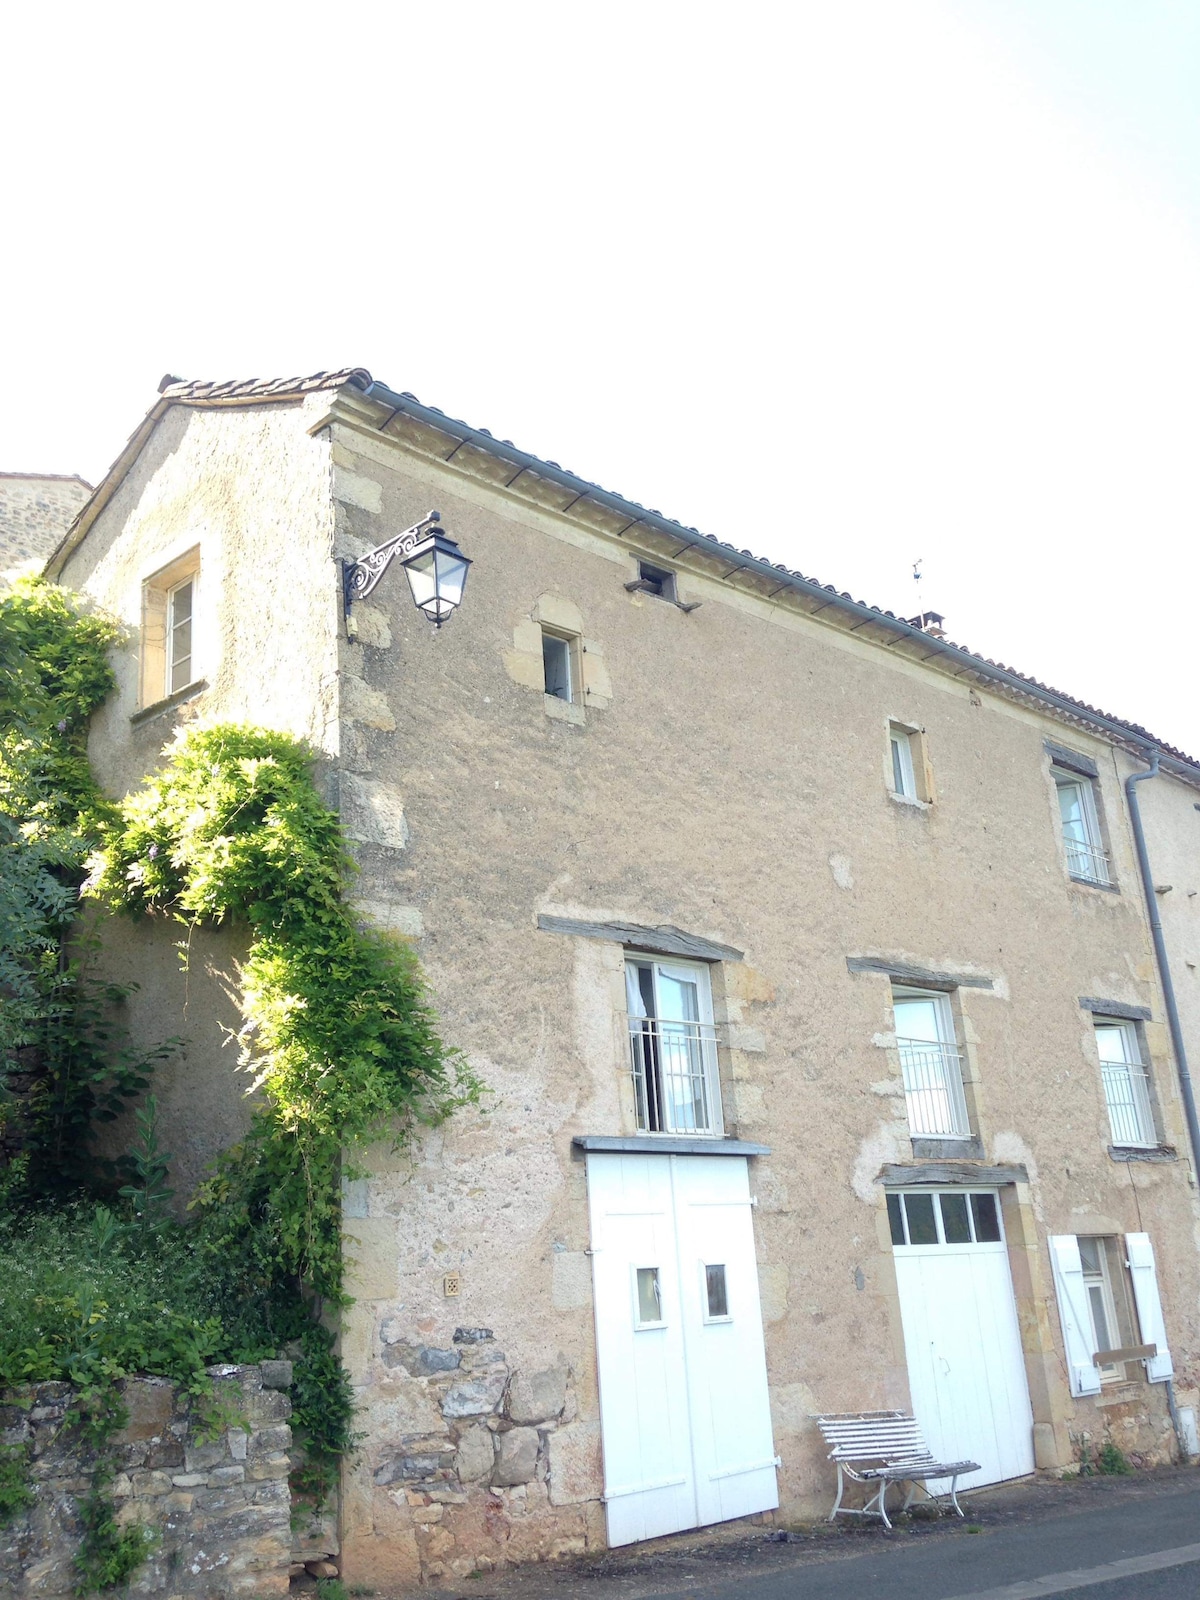 A House with a view on Puycelsi's fortress.